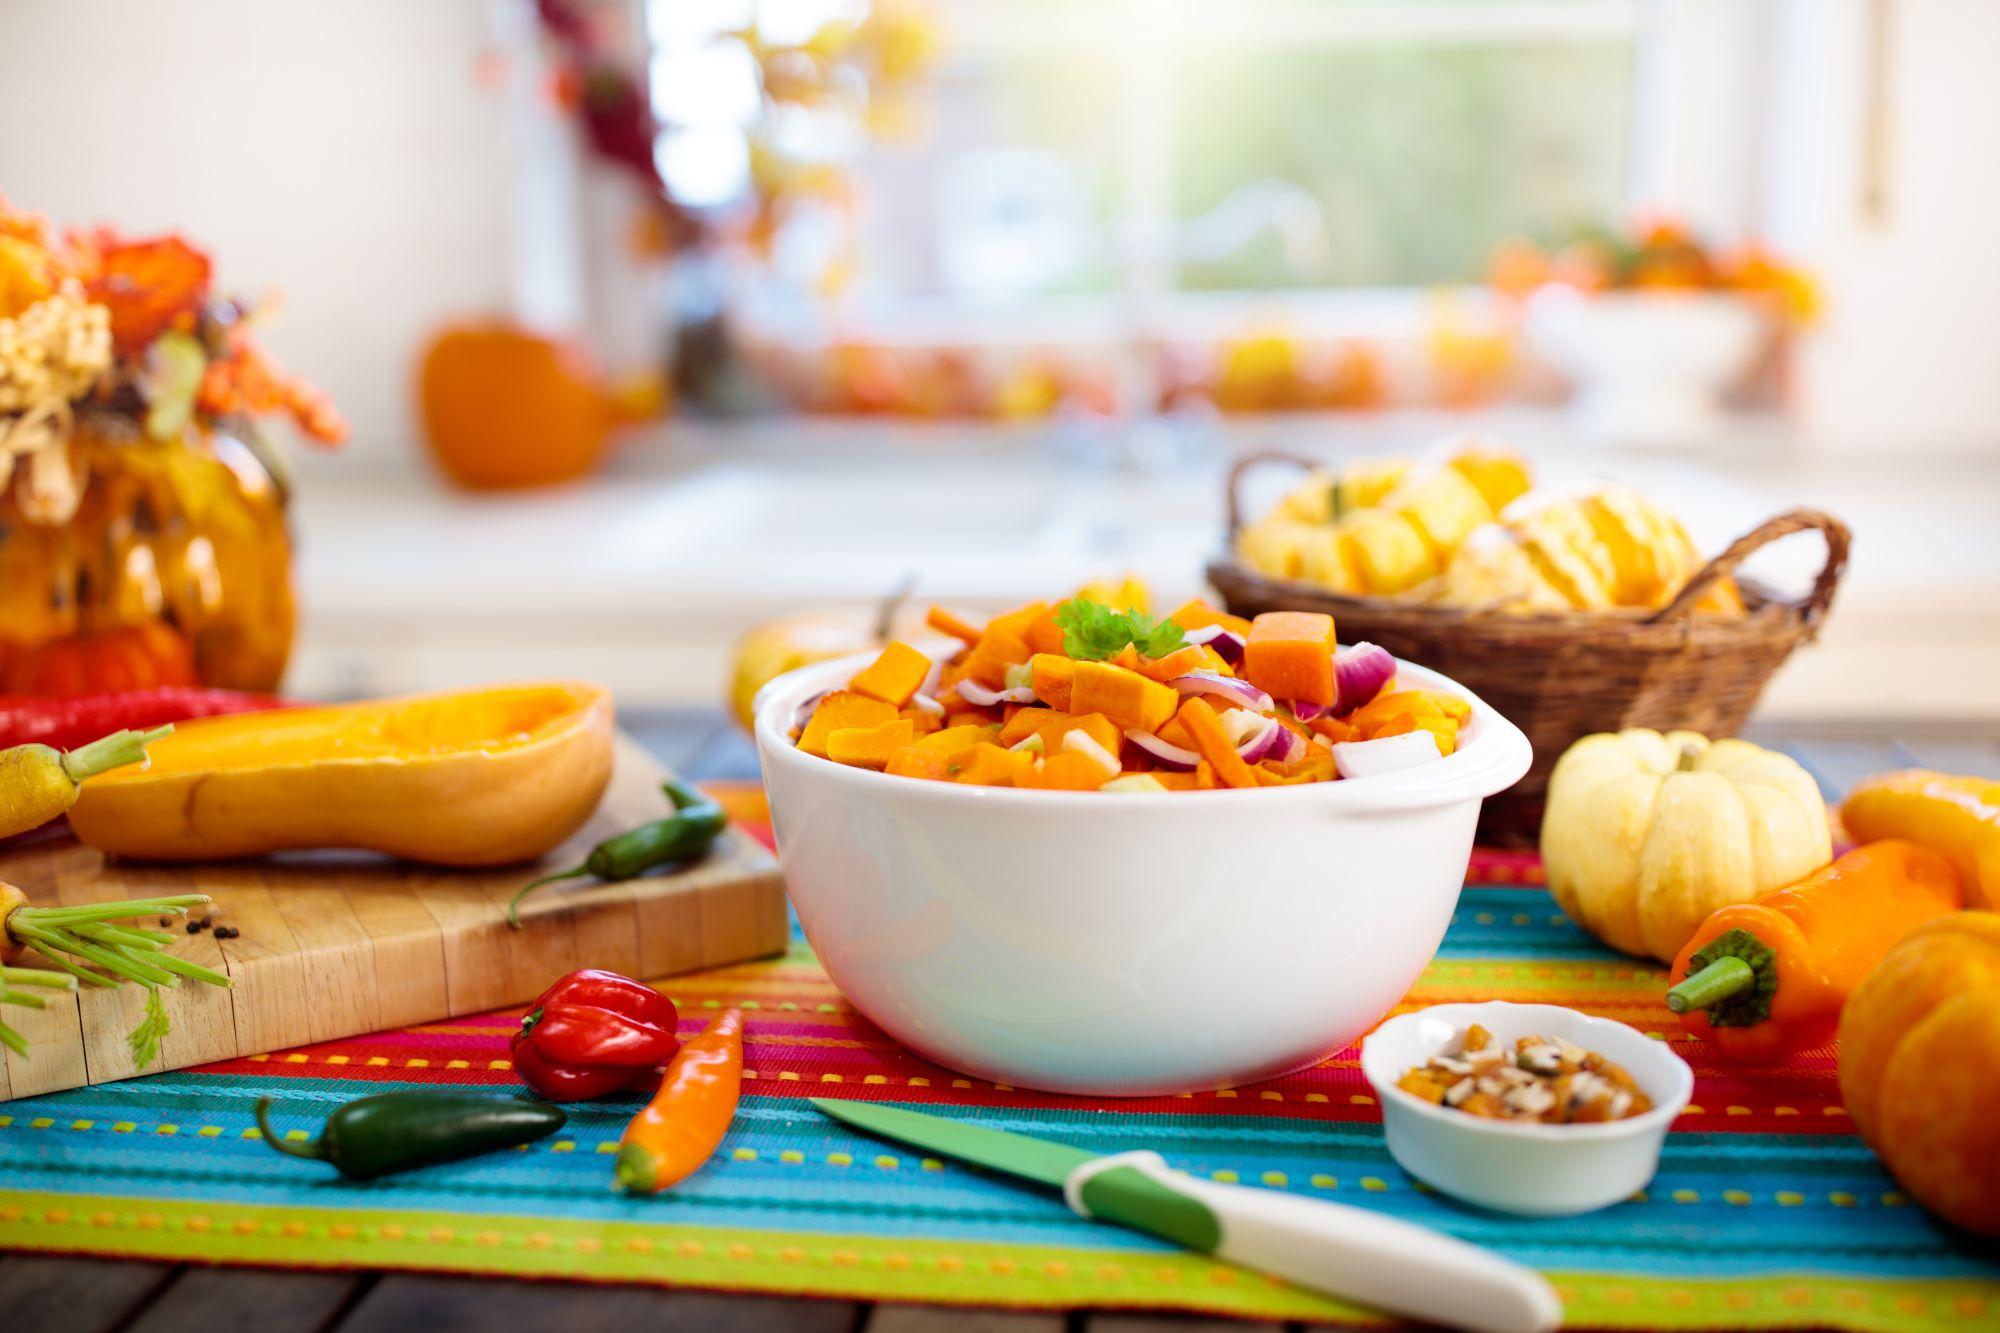 A fall recipe with butternut squash, onions, and peppers in a white bowl. Surrounded by fall decor.